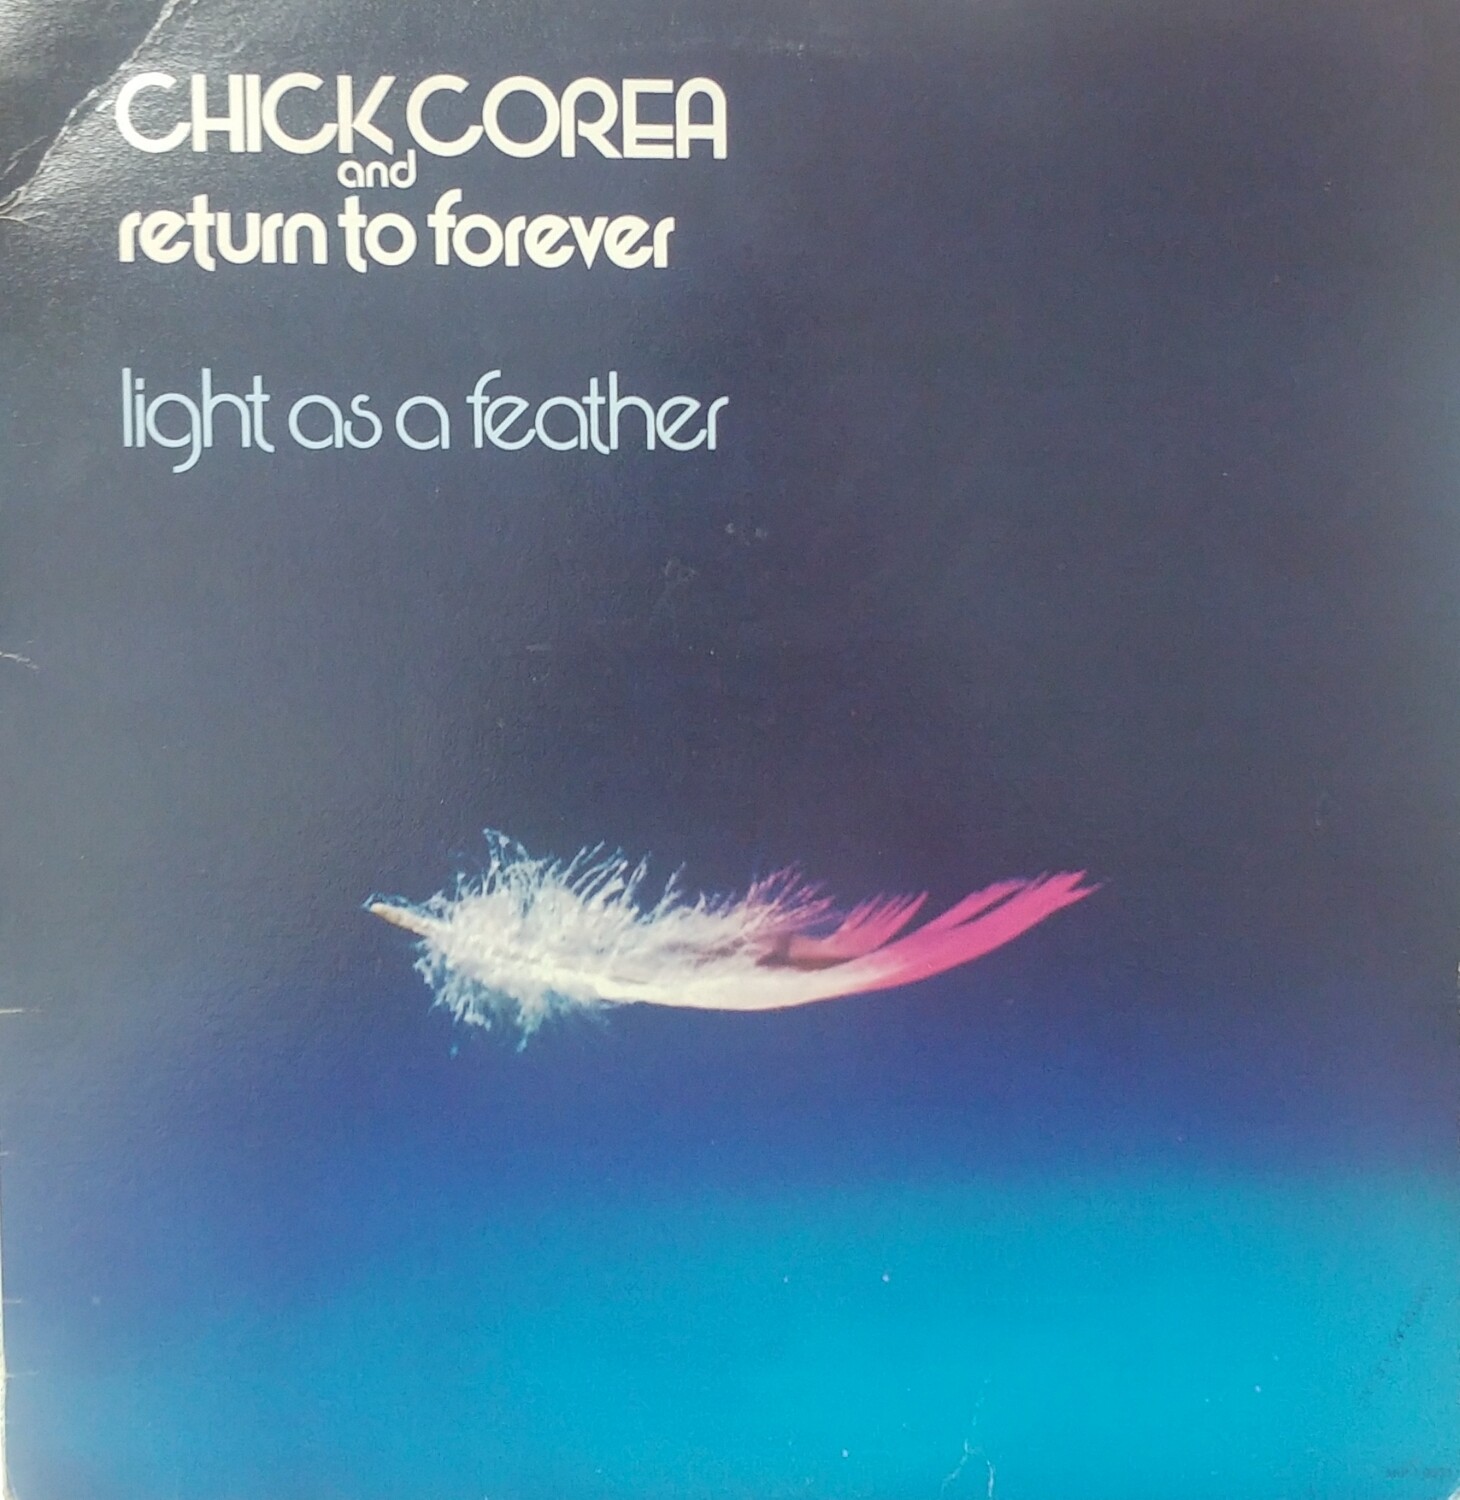 Chick Corea & Return to Forever - Light as a feather